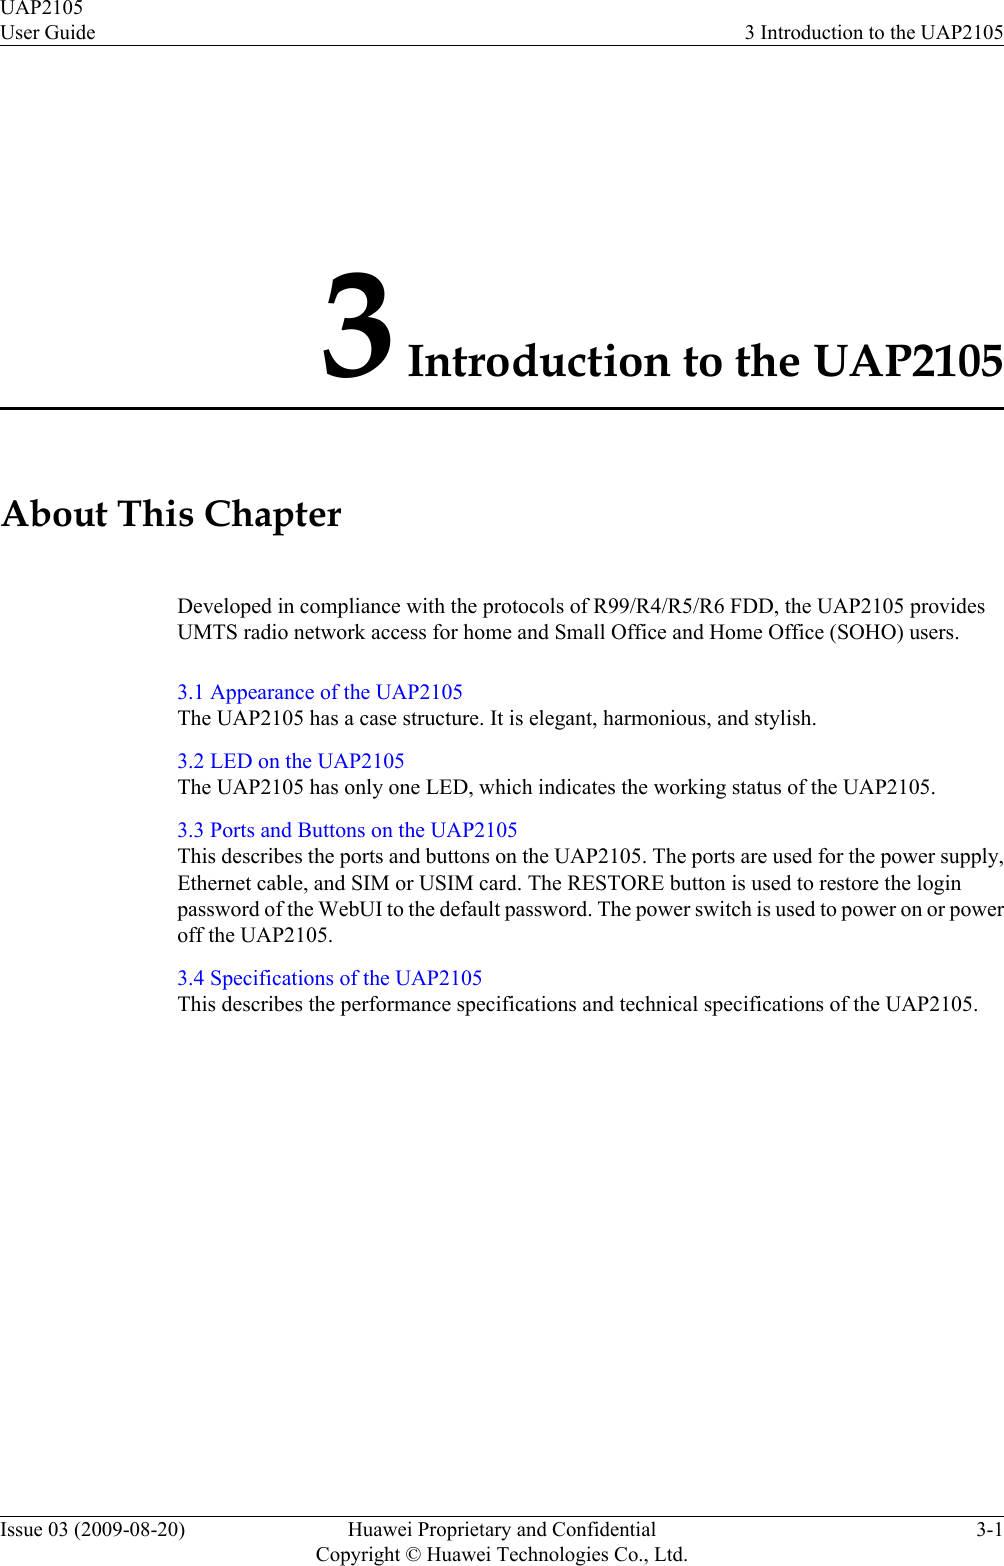 3 Introduction to the UAP2105About This ChapterDeveloped in compliance with the protocols of R99/R4/R5/R6 FDD, the UAP2105 providesUMTS radio network access for home and Small Office and Home Office (SOHO) users.3.1 Appearance of the UAP2105The UAP2105 has a case structure. It is elegant, harmonious, and stylish.3.2 LED on the UAP2105The UAP2105 has only one LED, which indicates the working status of the UAP2105.3.3 Ports and Buttons on the UAP2105This describes the ports and buttons on the UAP2105. The ports are used for the power supply,Ethernet cable, and SIM or USIM card. The RESTORE button is used to restore the loginpassword of the WebUI to the default password. The power switch is used to power on or poweroff the UAP2105.3.4 Specifications of the UAP2105This describes the performance specifications and technical specifications of the UAP2105.UAP2105User Guide 3 Introduction to the UAP2105Issue 03 (2009-08-20) Huawei Proprietary and ConfidentialCopyright © Huawei Technologies Co., Ltd.3-1